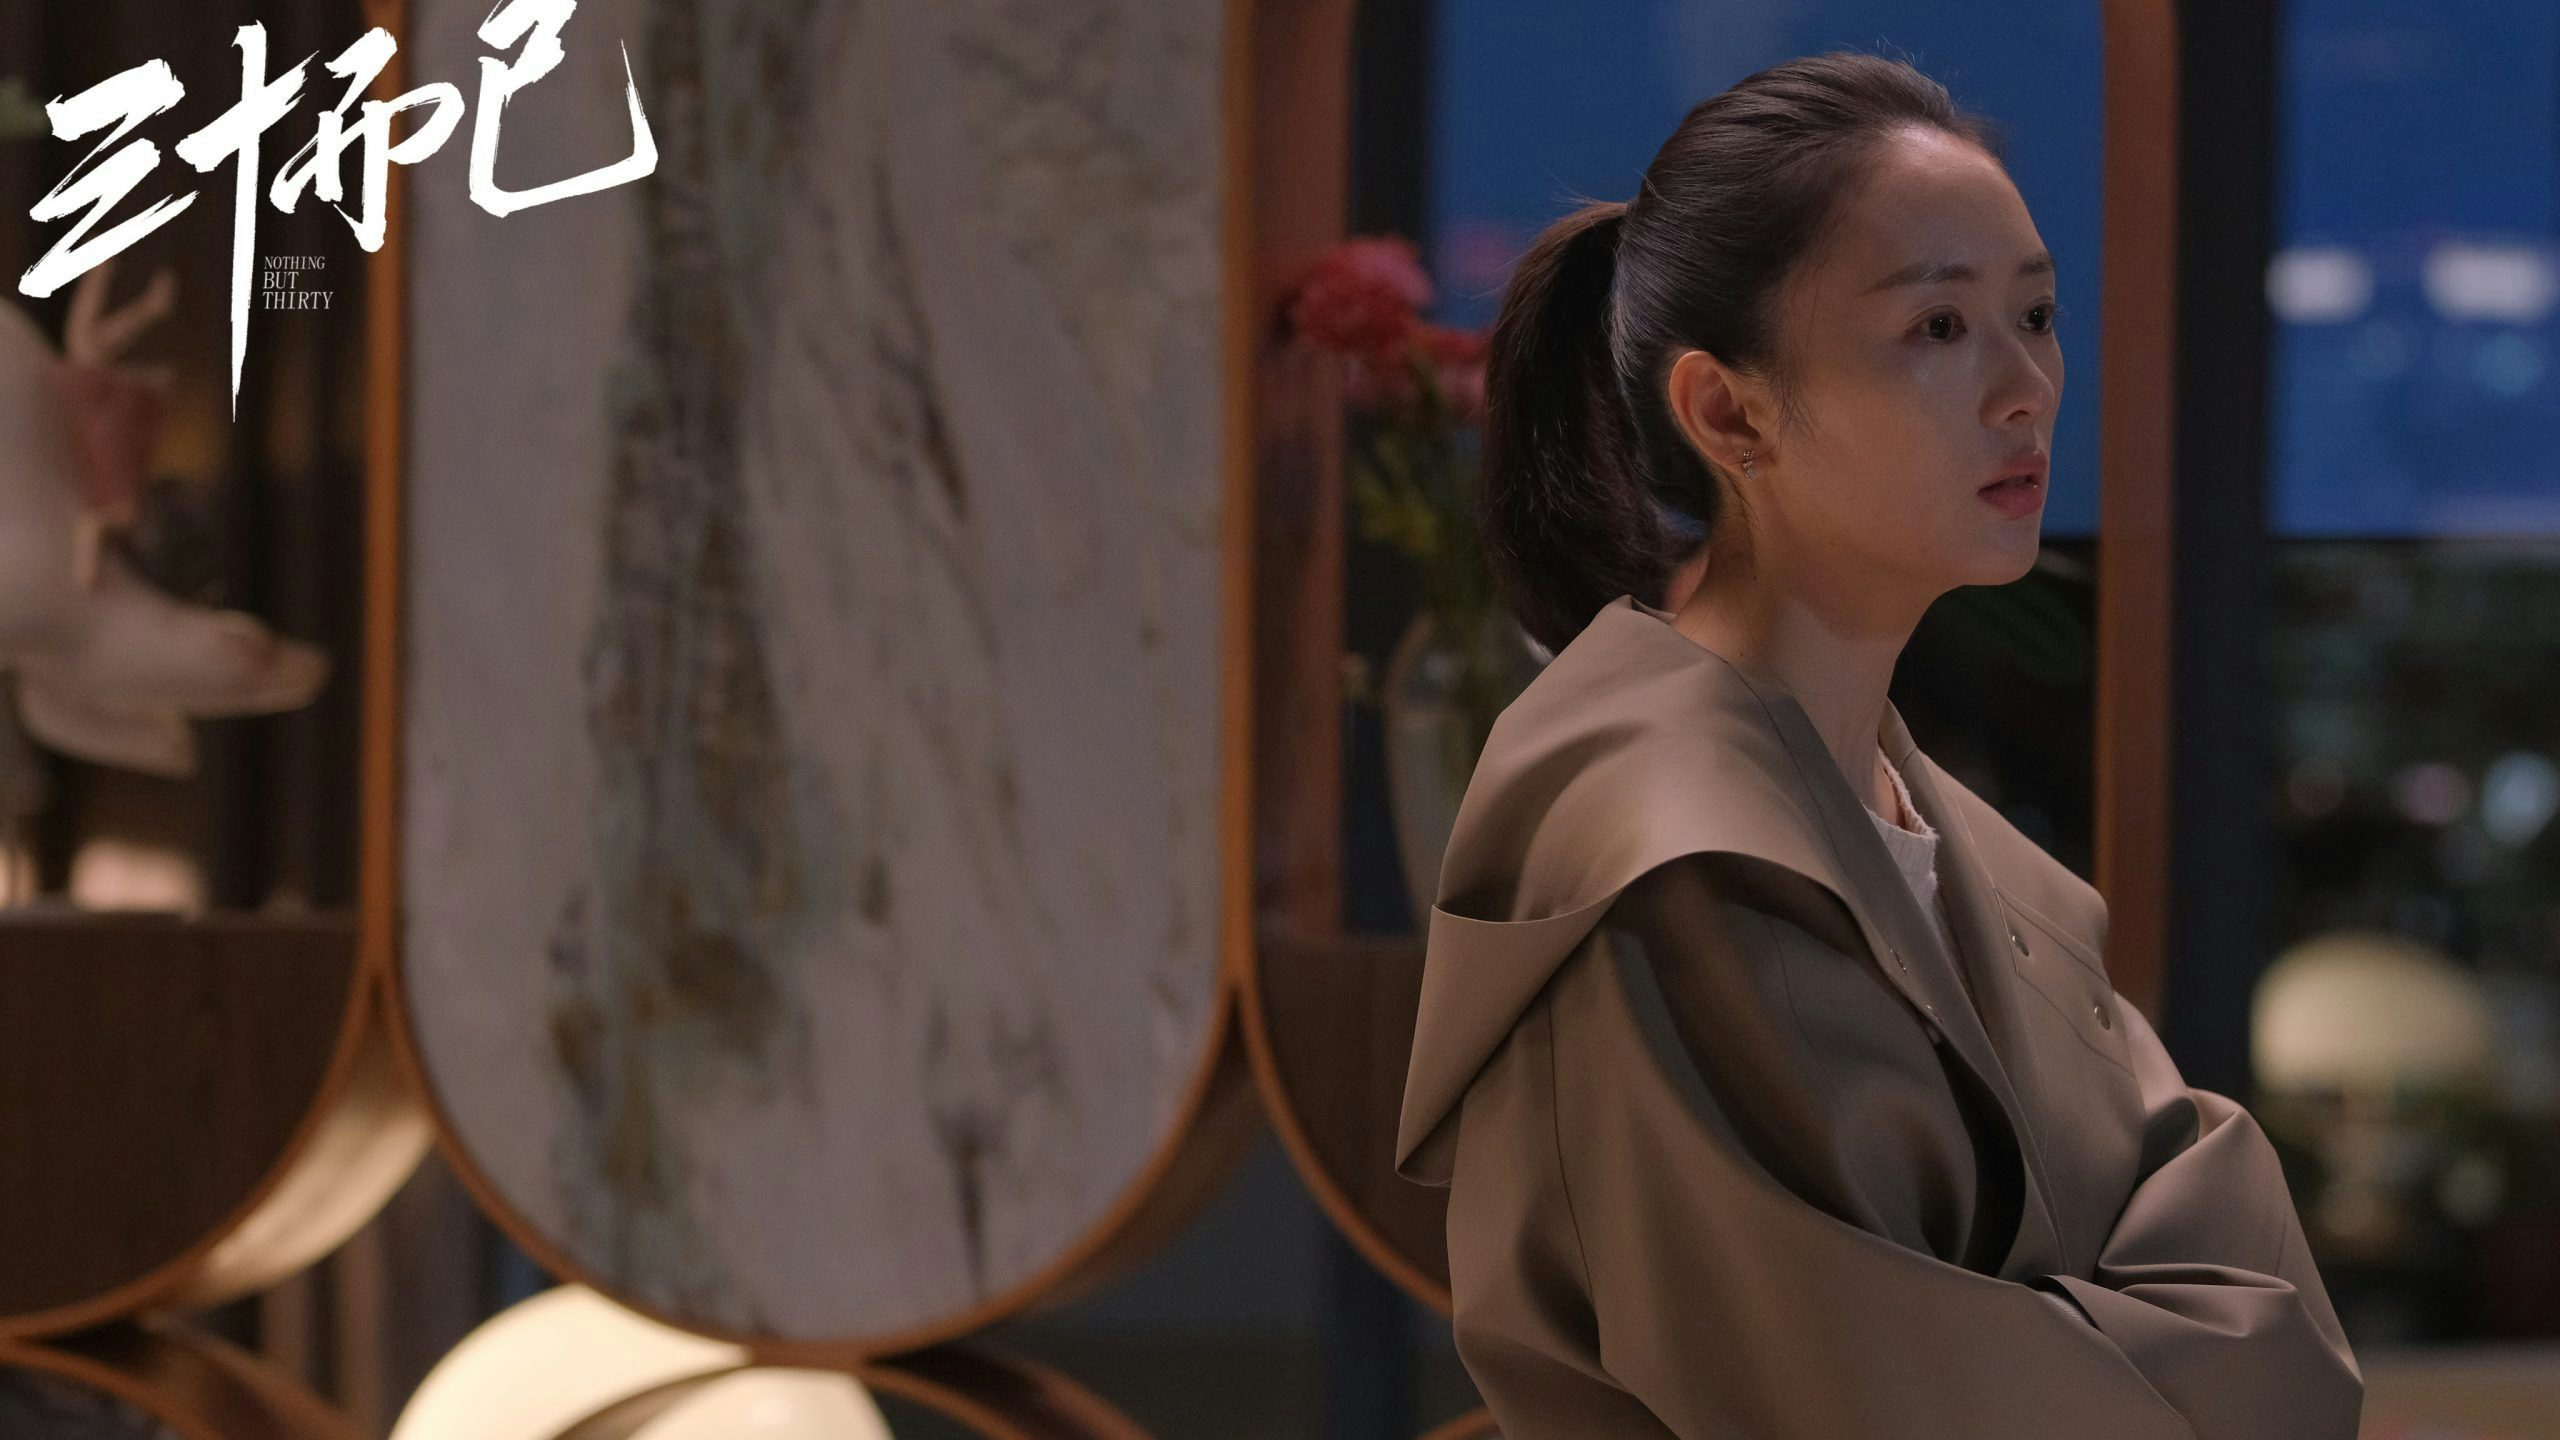 On-Screen and Off, Brand Endorsements Speak to China’s Empowered Women